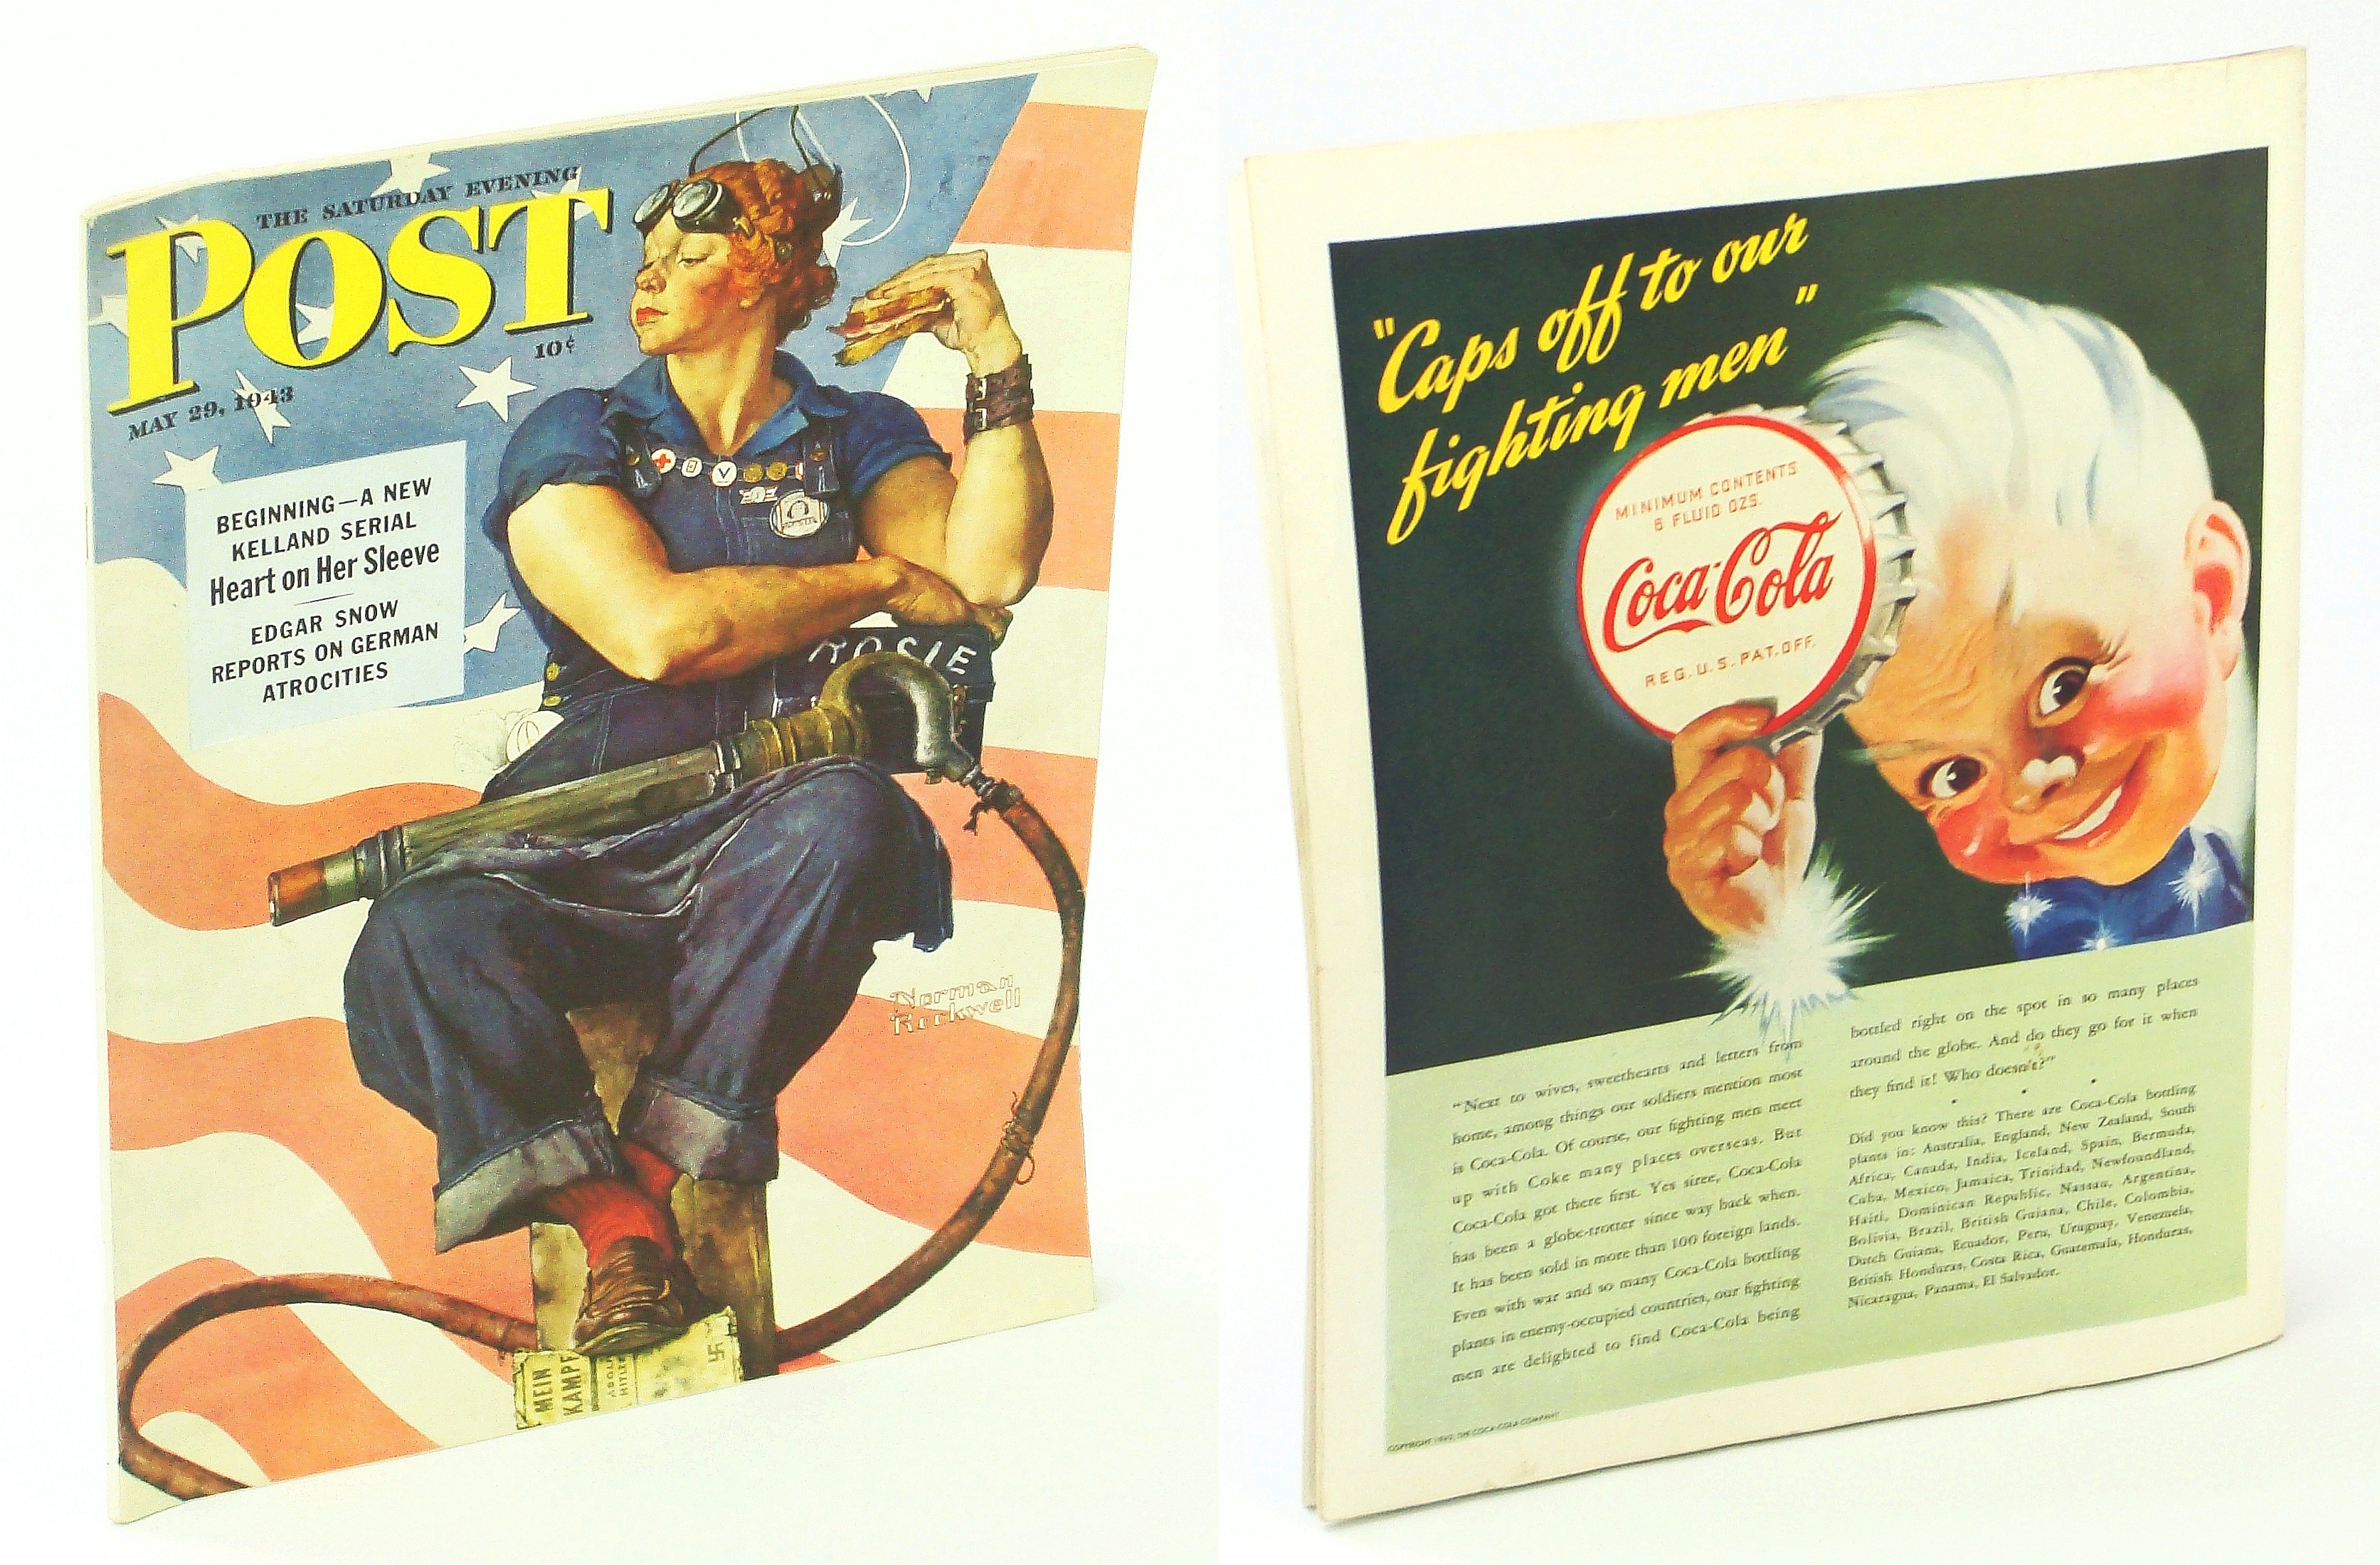 Image for The Saturday Evening Post, May 29, 1943 - Norman Rockwell's "Rosie The Riveter" Cover Vol. 215, No. 48